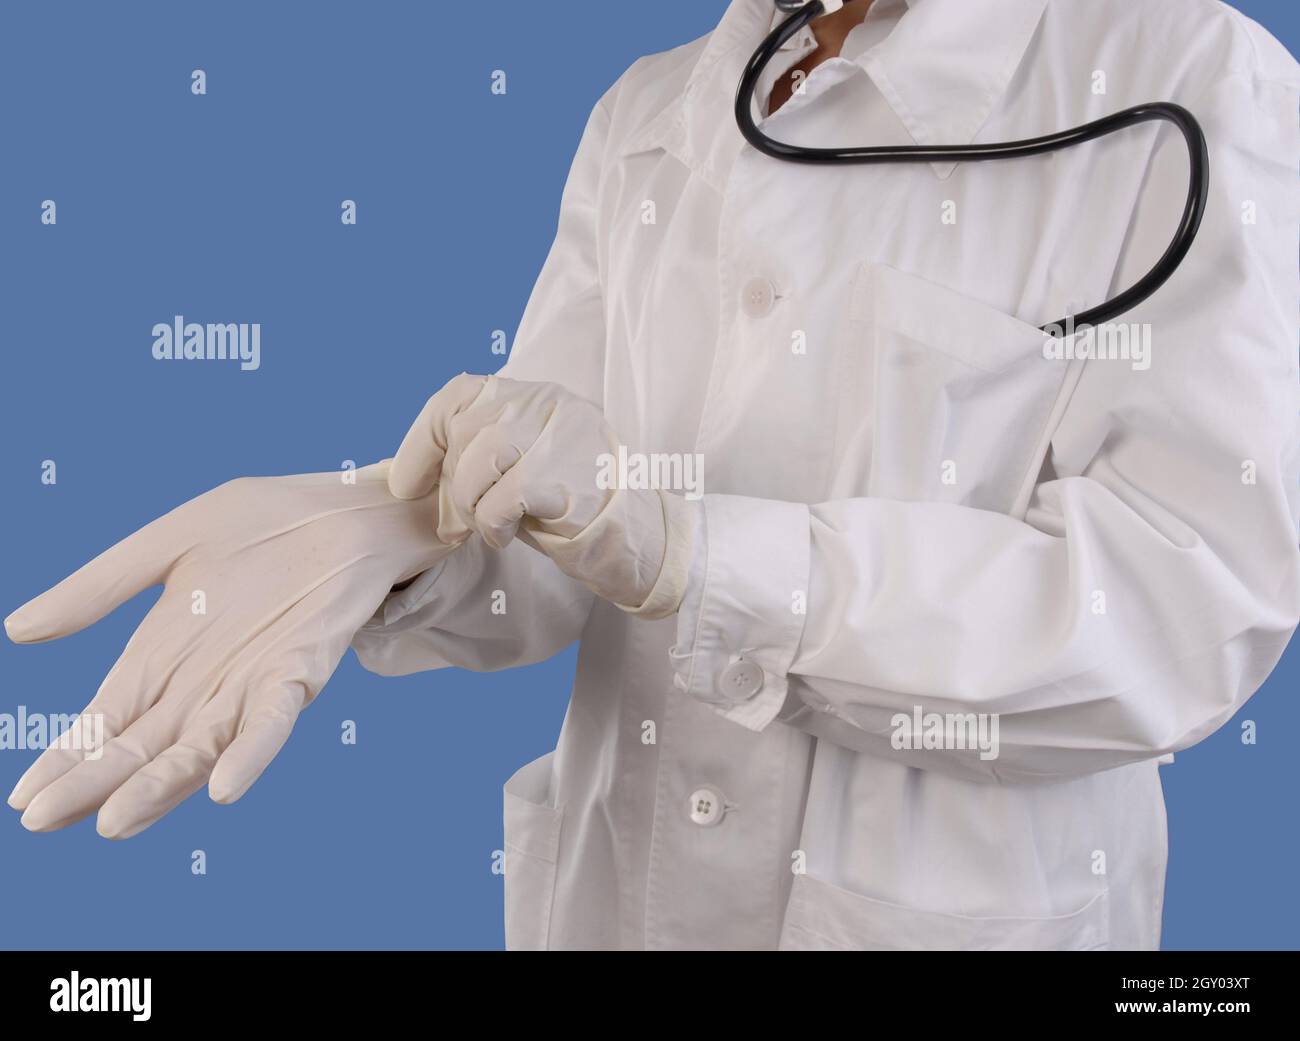 female doctor putting on latex gloves Stock Photo